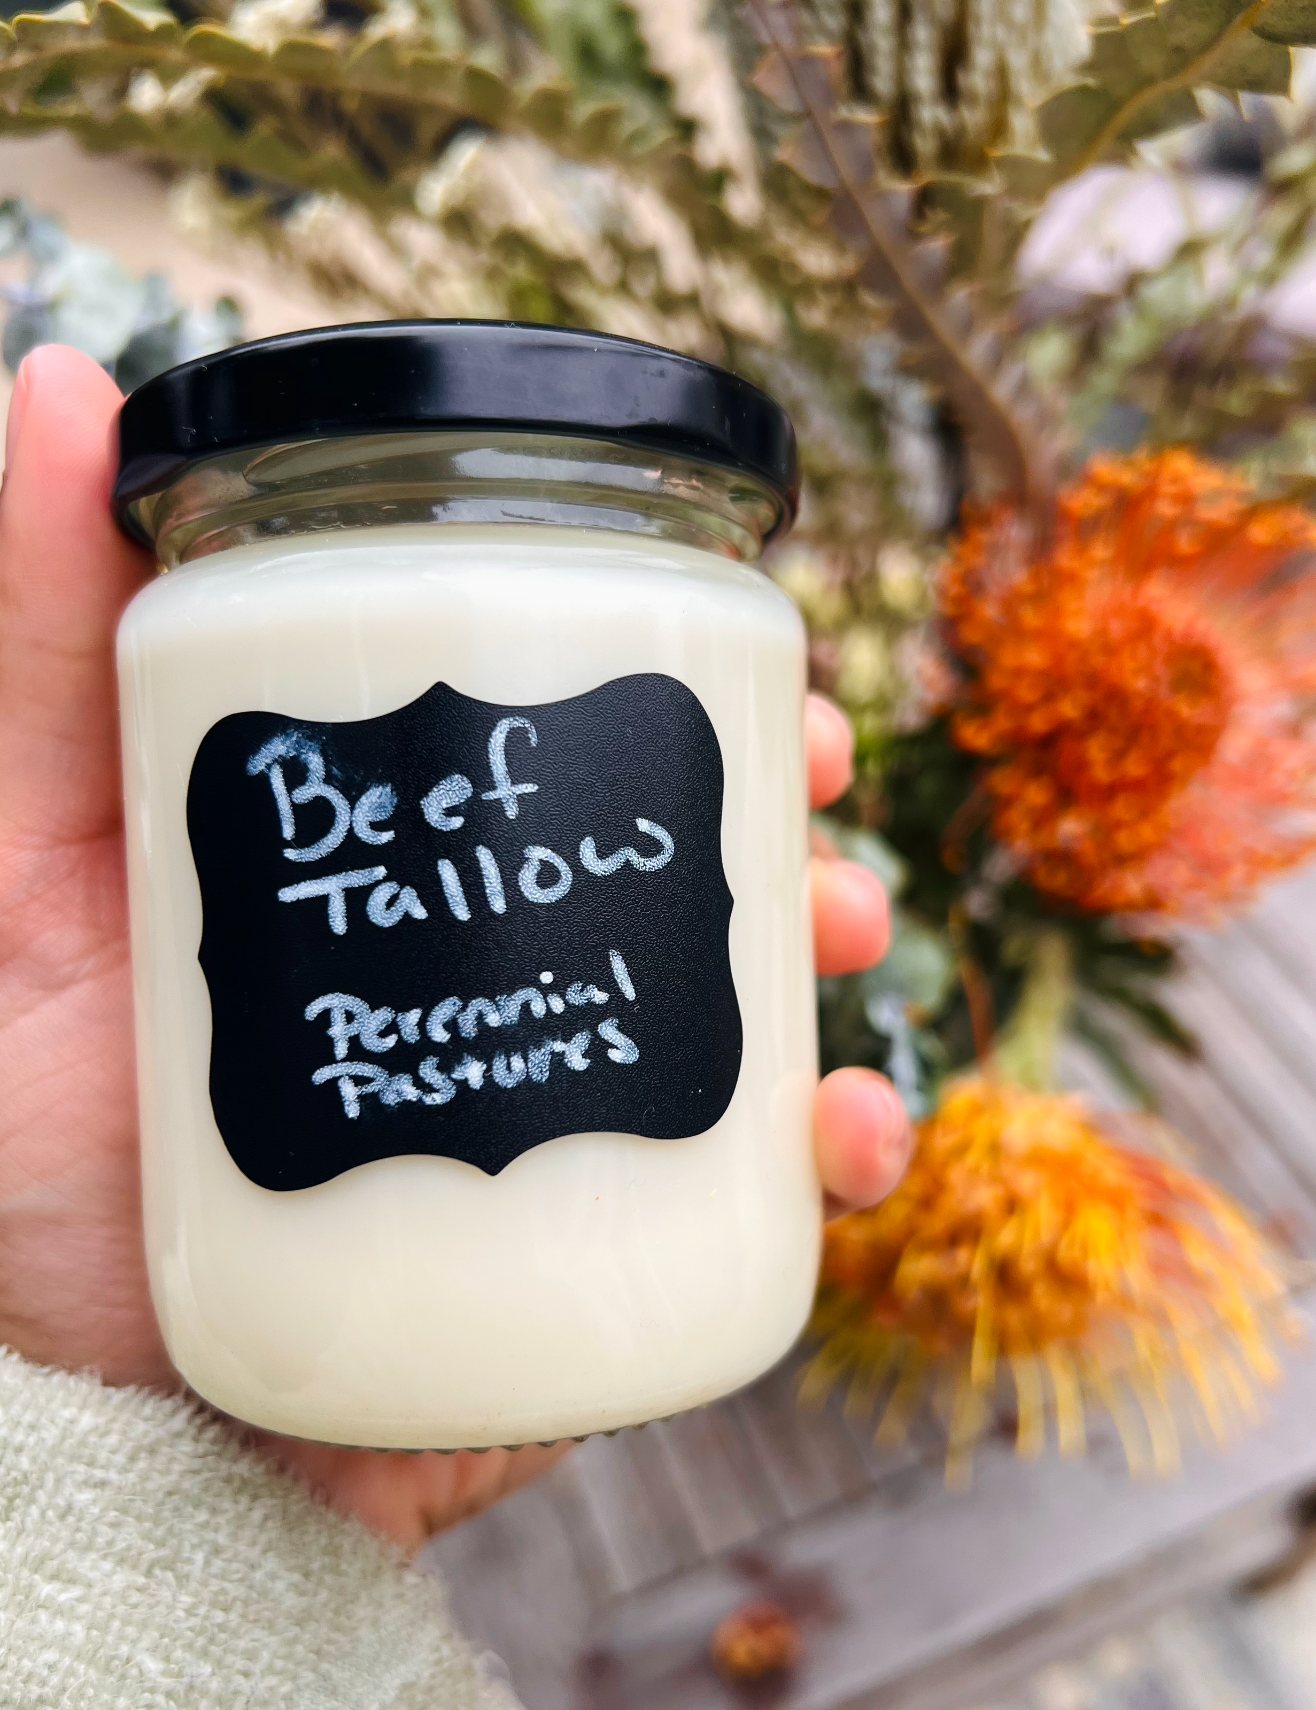 Grass-fed/finished Pasture-Raised Beef Tallow